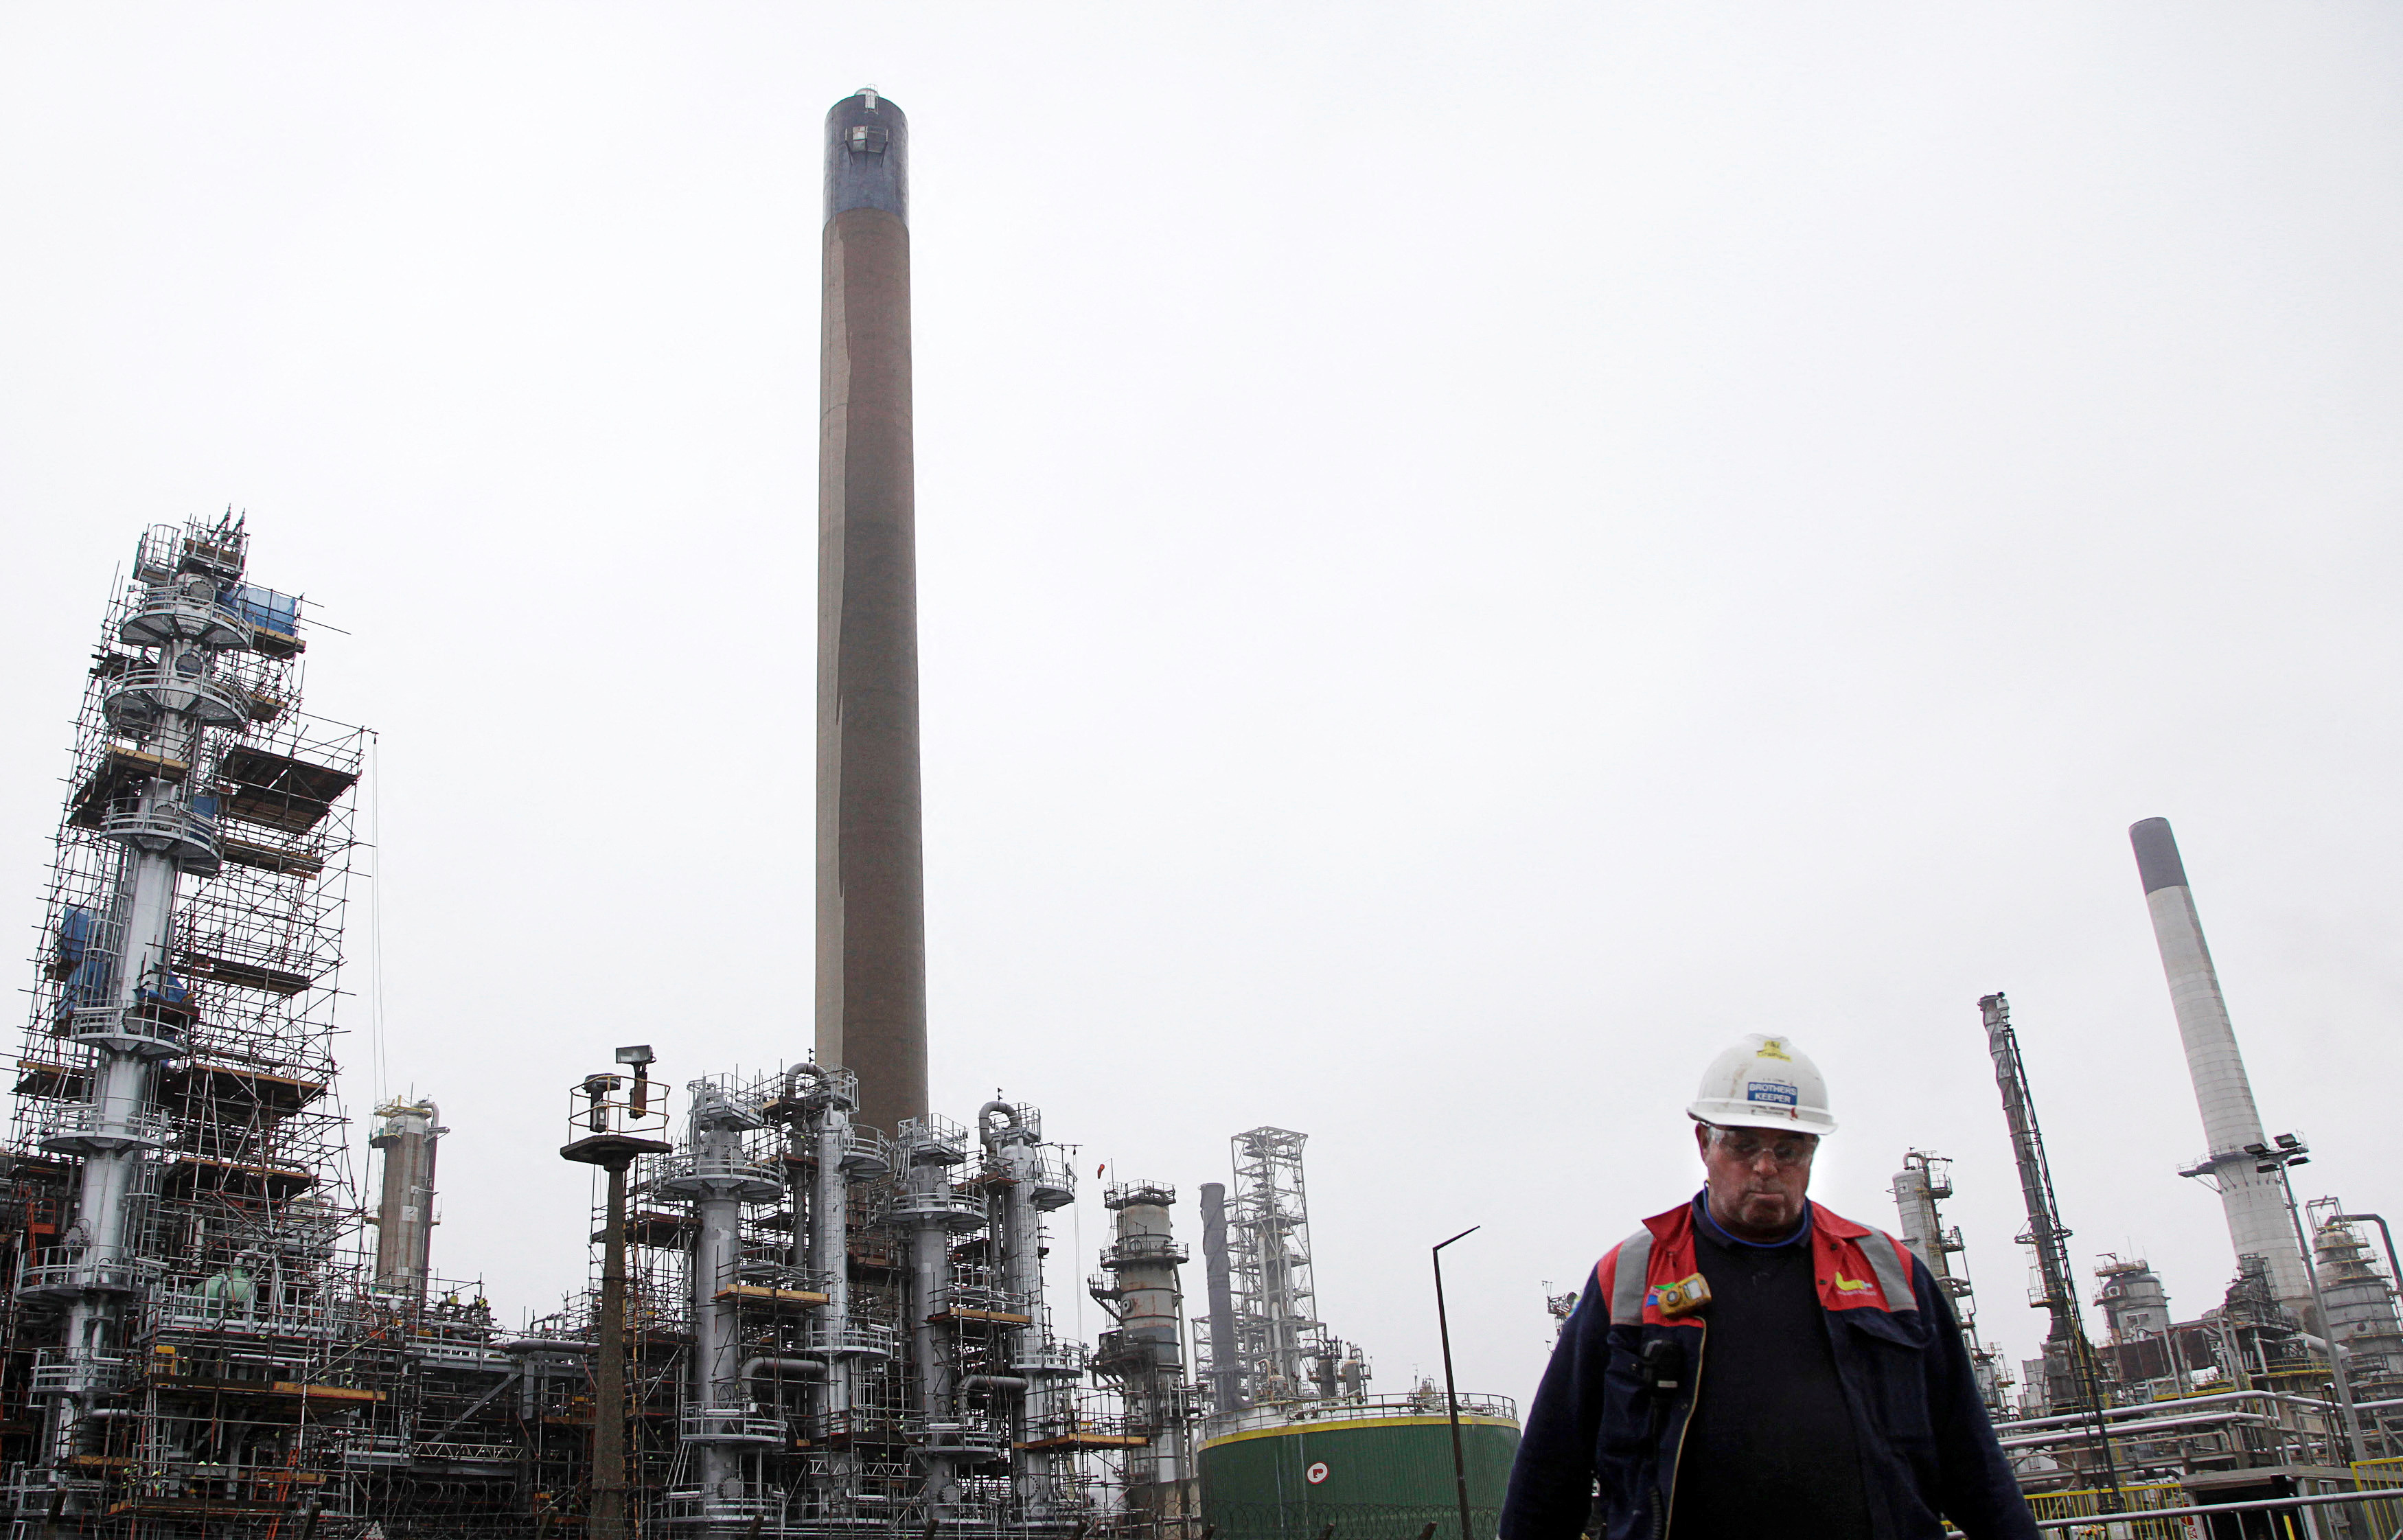 A worker walks at the Coryton oil refinery in south-eastern England